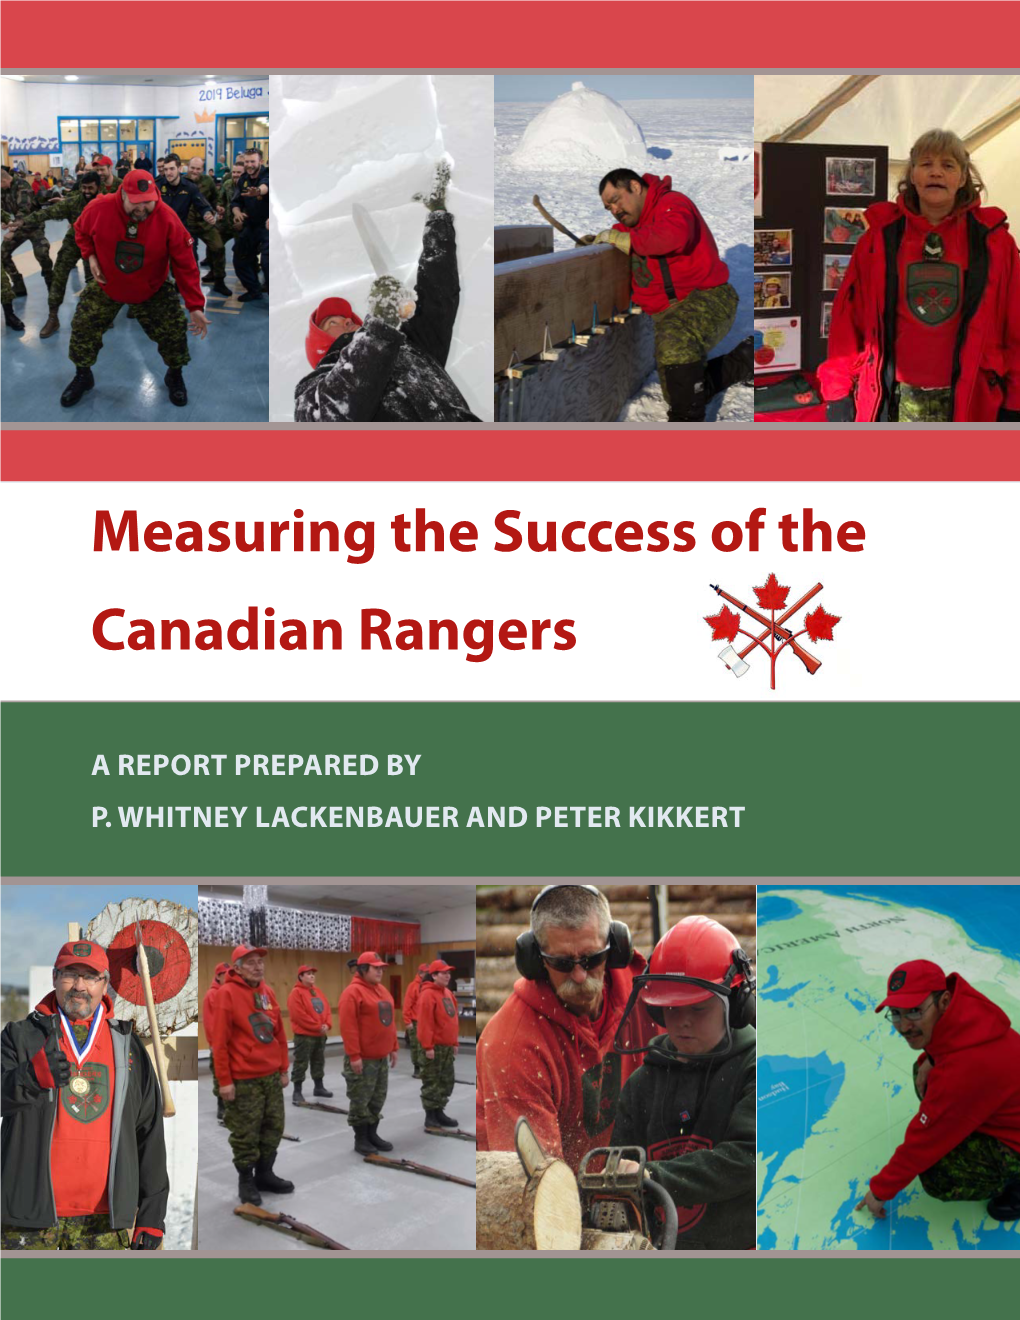 Measuring the Success of the Canadian Rangers